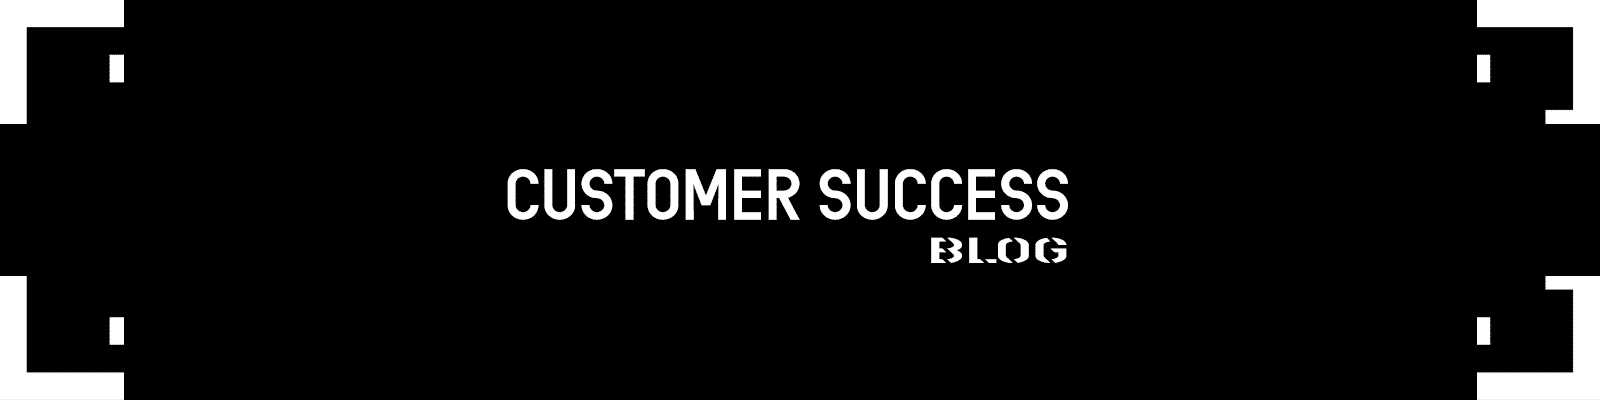 header graphic for customer success stories